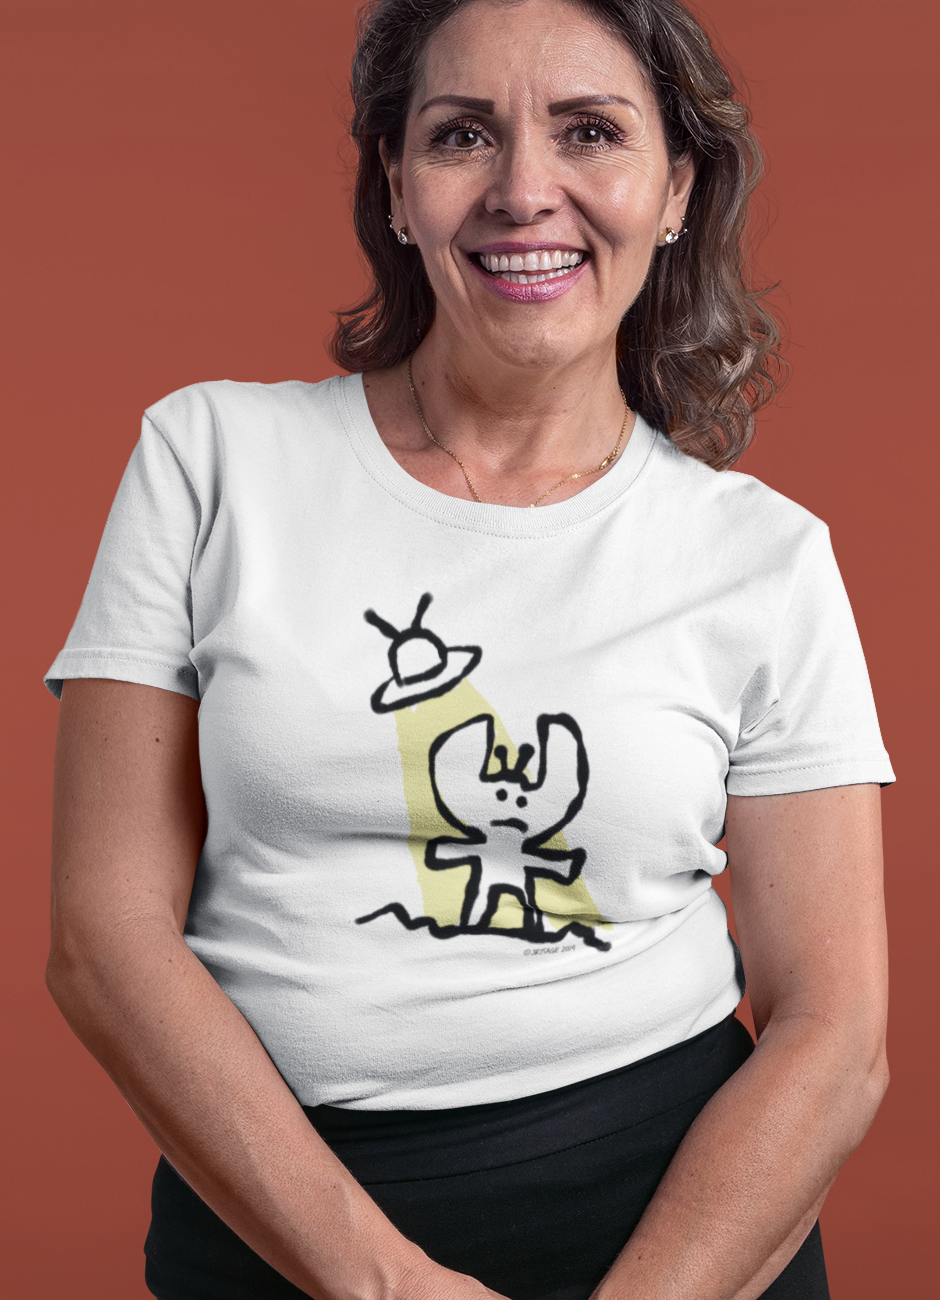 Alien T-shirt - Woman wearing a cute Alien t-shirt illustrated on a classic white vegan t-shirt by Hector and Bone